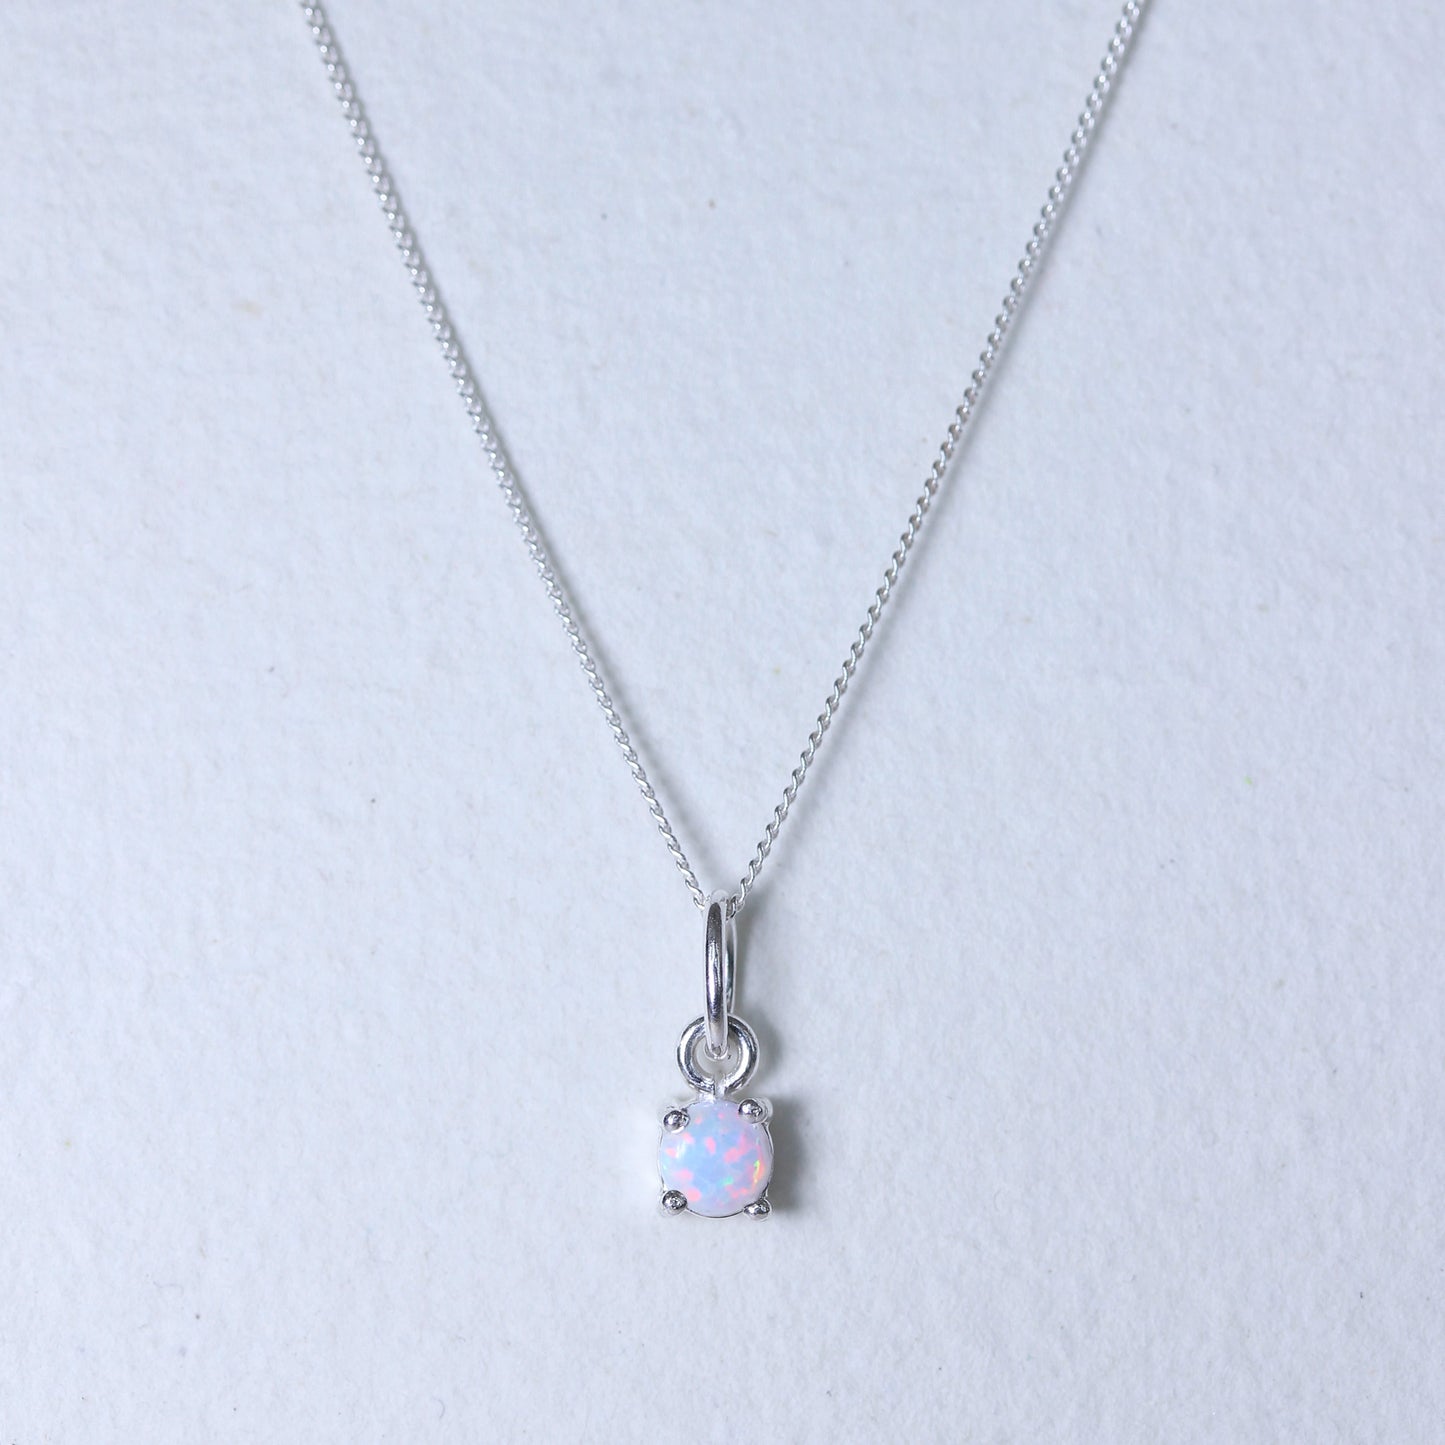 Sterling Silver Opal October Birthstone Necklace - 14 - 32 Inches